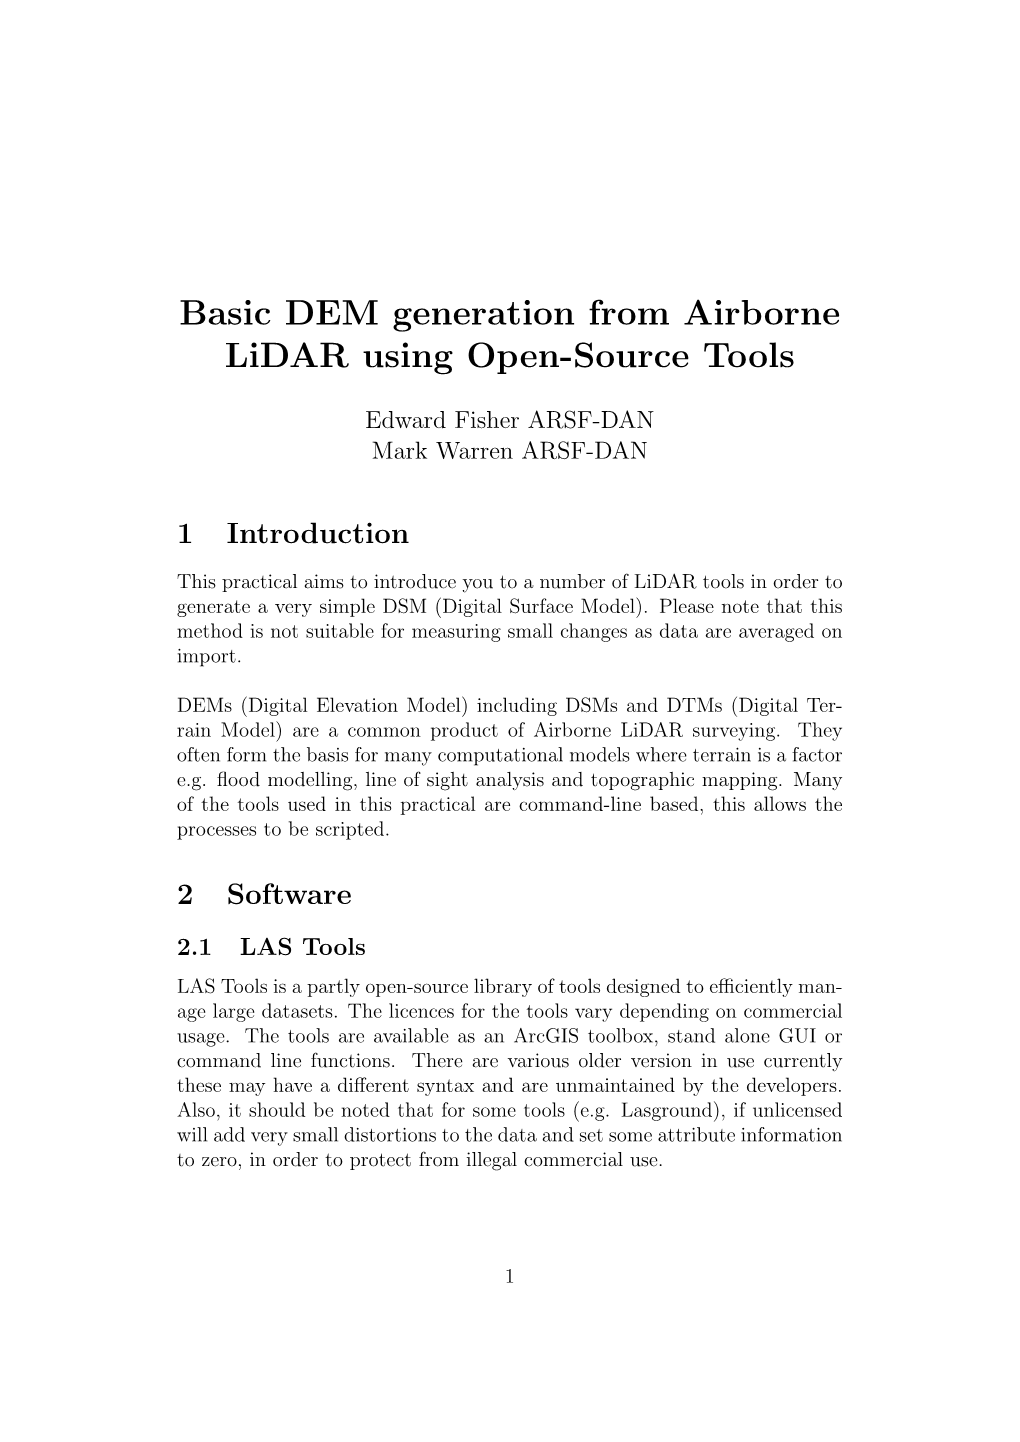 Basic DEM Generation from Airborne Lidar Using Open-Source Tools